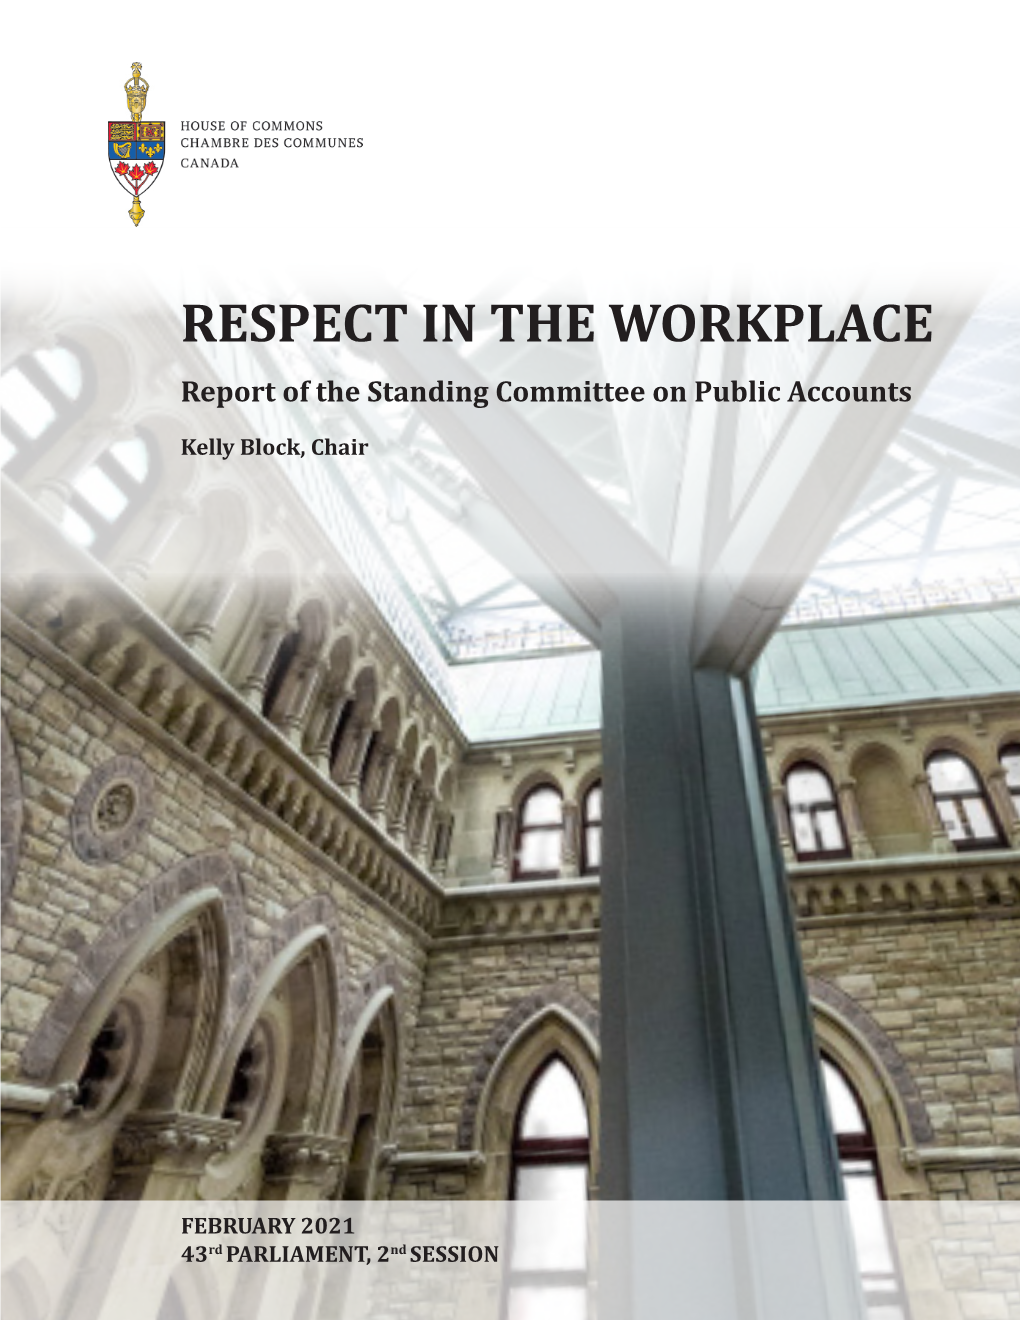 RESPECT in the WORKPLACE Report of the Standing Committee on Public Accounts